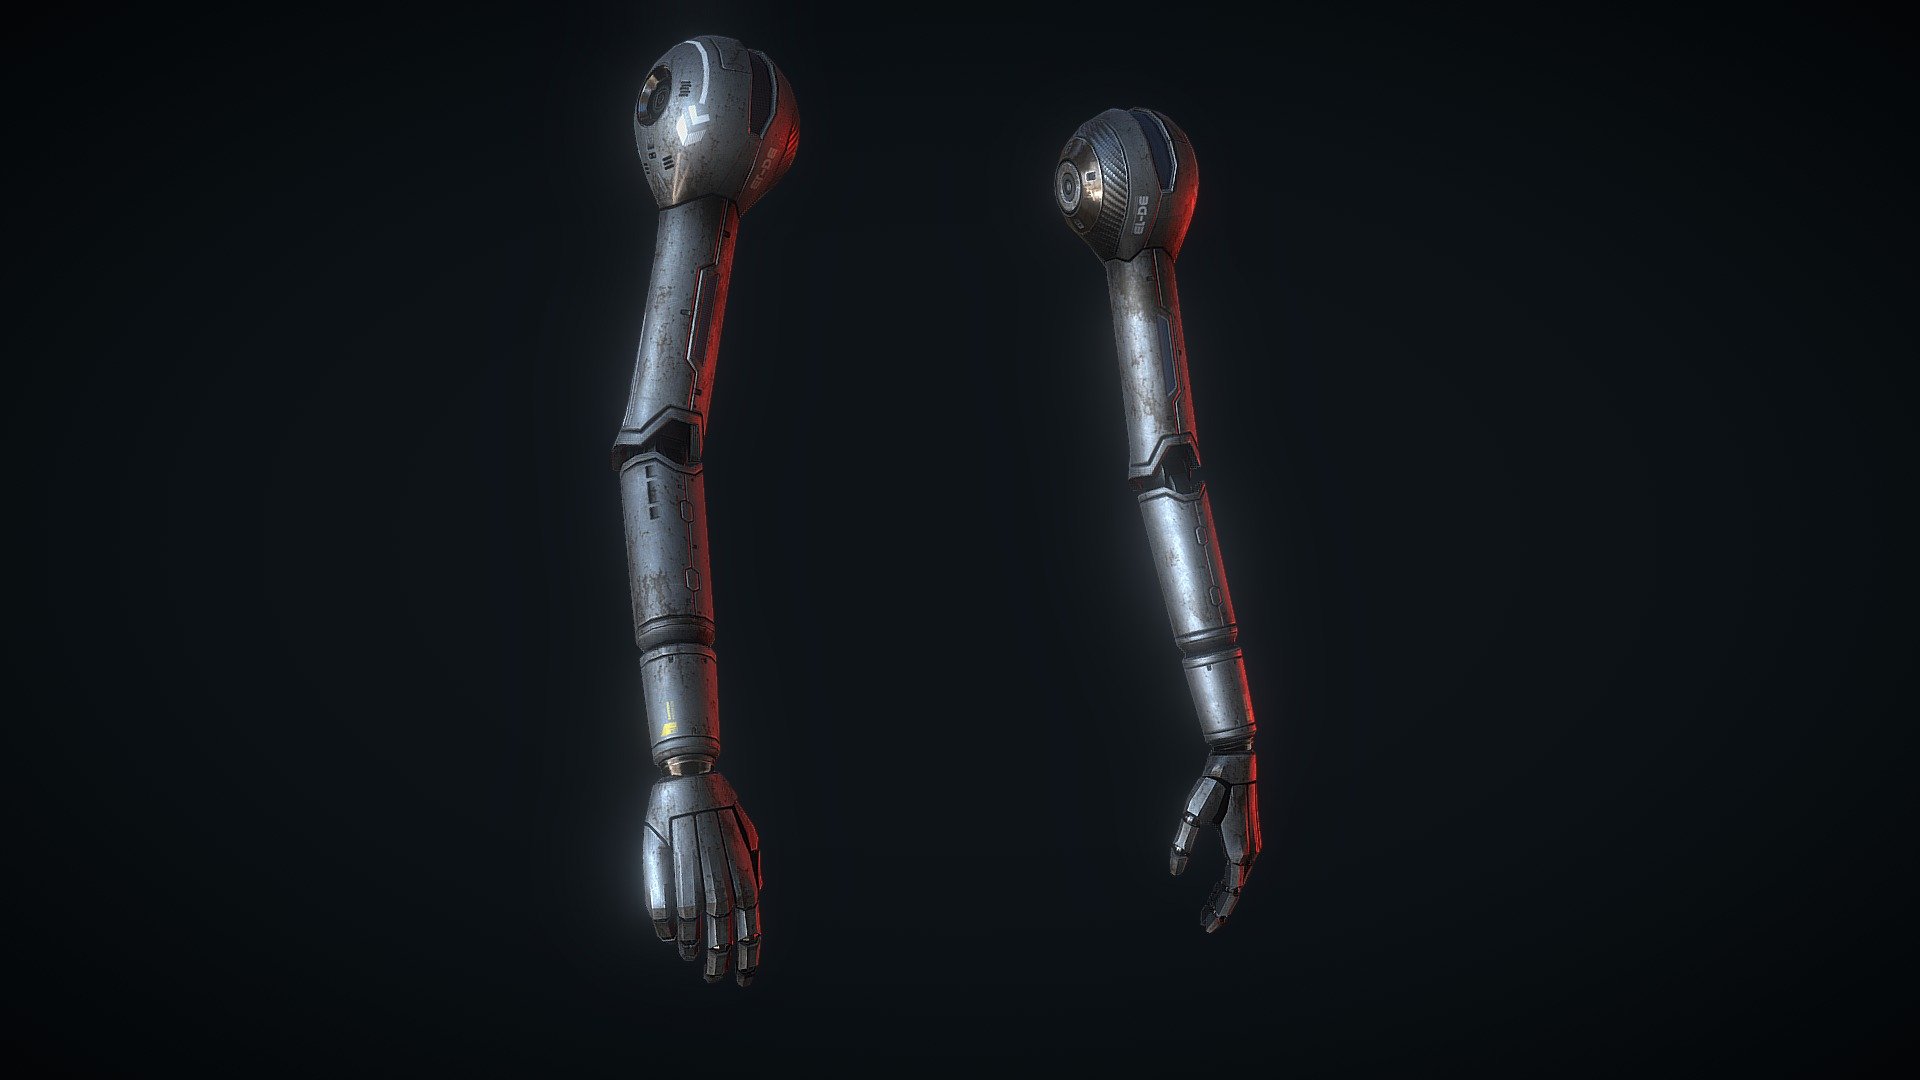 These arms were optimized for Quest2 performance level. The texturing and unwrapping was done on one single texture, to prevent further draw calls for mobile VR systems. A wrist system has been added too. Was tested and works great with the free Unity addon VRarmsIK, which has till now the best ellbow correction system ever invented. And it's free too. However, I tested these arms with this system and it was an amazing result. The arms are not connected to a &ldquo;chest